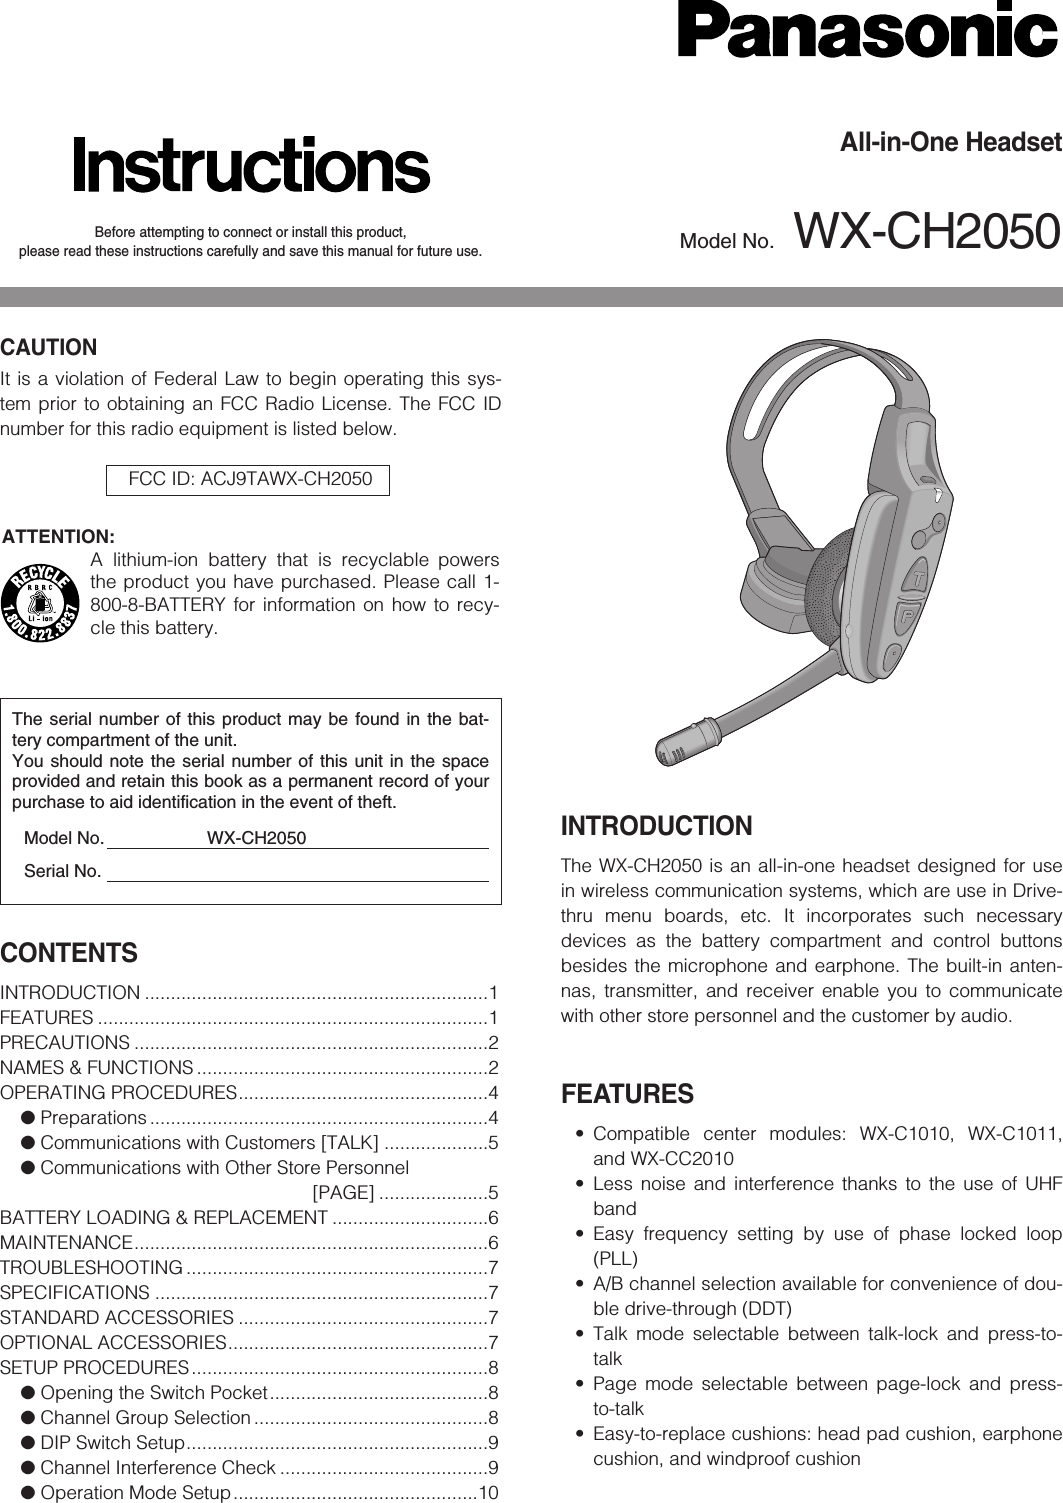 Before attempting to connect or install this product,please read these instructions carefully and save this manual for future use.All-in-One HeadsetModel No. WX-CH2050INTRODUCTIONThe WX-CH2050 is an all-in-one headset designed for usein wireless communication systems, which are use in Drive-thru menu boards, etc. It incorporates such necessarydevices as the battery compartment and control buttonsbesides the microphone and earphone. The built-in anten-nas, transmitter, and receiver enable you to communicatewith other store personnel and the customer by audio.FEATURES• Compatible center modules: WX-C1010, WX-C1011,and WX-CC2010• Less noise and interference thanks to the use of UHFband• Easy frequency setting by use of phase locked loop(PLL)• A/B channel selection available for convenience of dou-ble drive-through (DDT)• Talk mode selectable between talk-lock and press-to-talk• Page mode selectable between page-lock and press-to-talk• Easy-to-replace cushions: head pad cushion, earphonecushion, and windproof cushionThe serial number of this product may be found in the bat-tery compartment of the unit.You should note the serial number of this unit in the spaceprovided and retain this book as a permanent record of yourpurchase to aid identification in the event of theft.Model No. WX-CH2050Serial No.CAUTIONIt is a violation of Federal Law to begin operating this sys-tem prior to obtaining an FCC Radio License. The FCC IDnumber for this radio equipment is listed below.FCC ID: ACJ9TAWX-CH2050CONTENTSINTRODUCTION ..................................................................1FEATURES ...........................................................................1PRECAUTIONS ....................................................................2NAMES &amp; FUNCTIONS ........................................................2OPERATING PROCEDURES................................................4●Preparations .................................................................4●Communications with Customers [TALK] ....................5●Communications with Other Store Personnel [PAGE] .....................5BATTERY LOADING &amp; REPLACEMENT ..............................6MAINTENANCE....................................................................6TROUBLESHOOTING ..........................................................7SPECIFICATIONS ................................................................7STANDARD ACCESSORIES ................................................7OPTIONAL ACCESSORIES..................................................7SETUP PROCEDURES.........................................................8●Opening the Switch Pocket..........................................8●Channel Group Selection .............................................8●DIP Switch Setup..........................................................9●Channel Interference Check ........................................9●Operation Mode Setup...............................................10ATTENTION:A lithium-ion battery that is recyclable powersthe product you have purchased. Please call 1-800-8-BATTERY for information on how to recy-cle this battery.